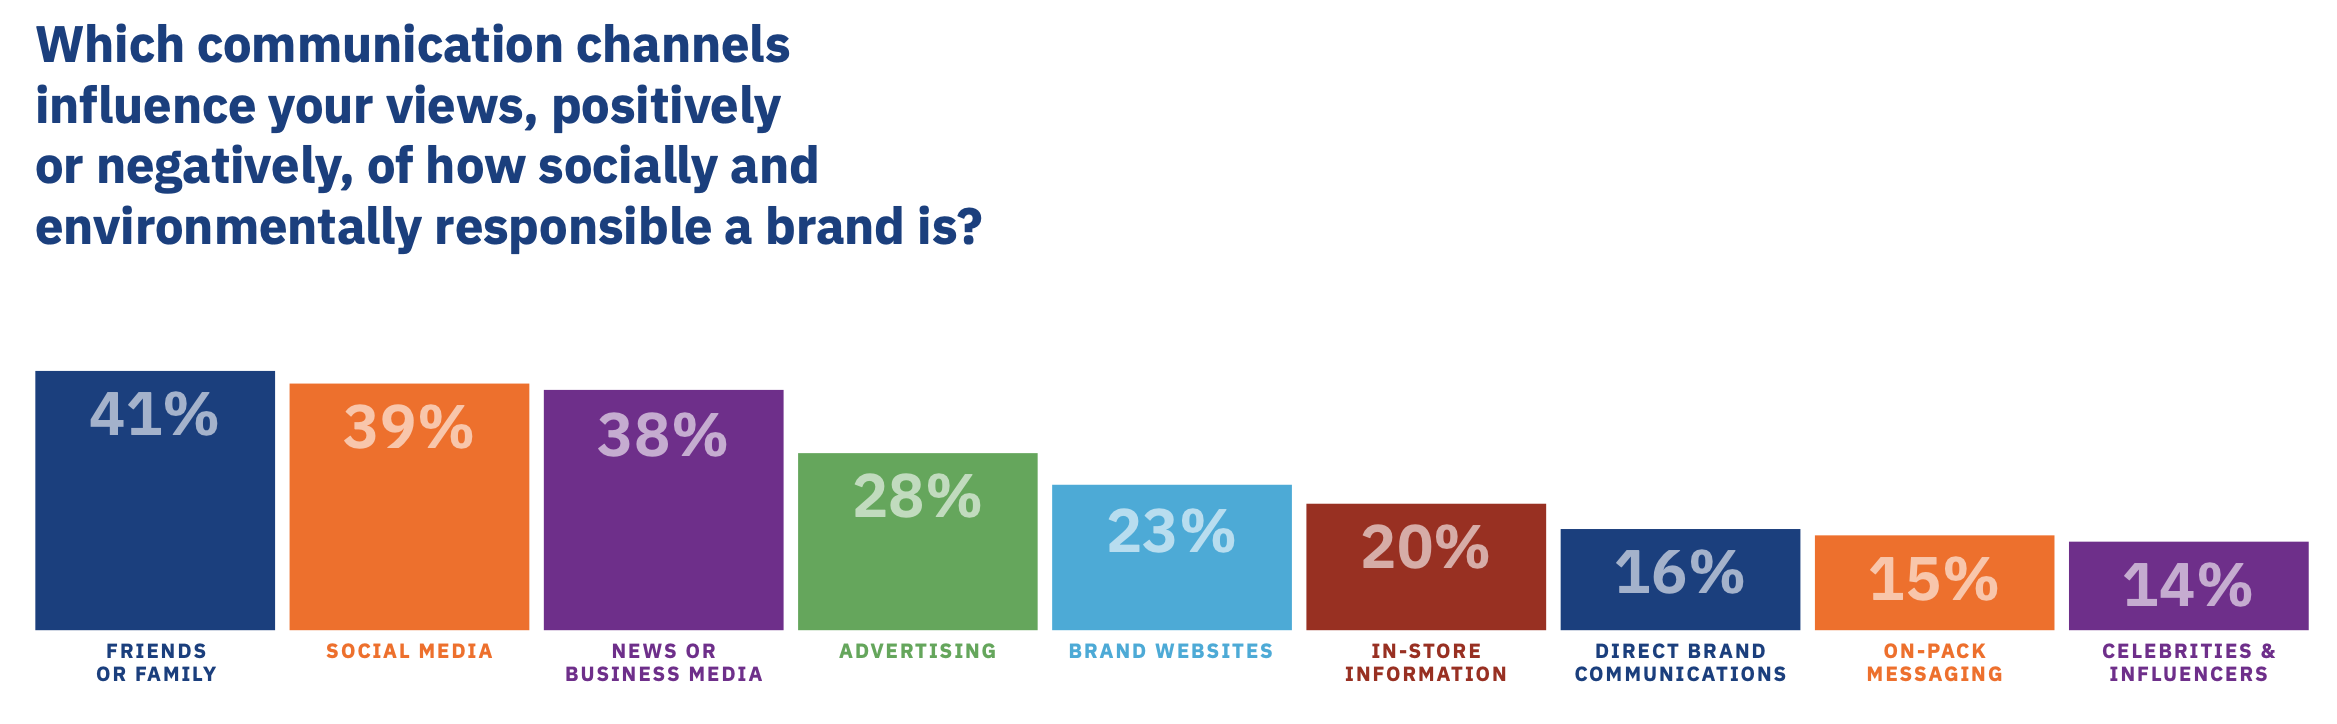 which channels most influence consumer perception of sustainable brands